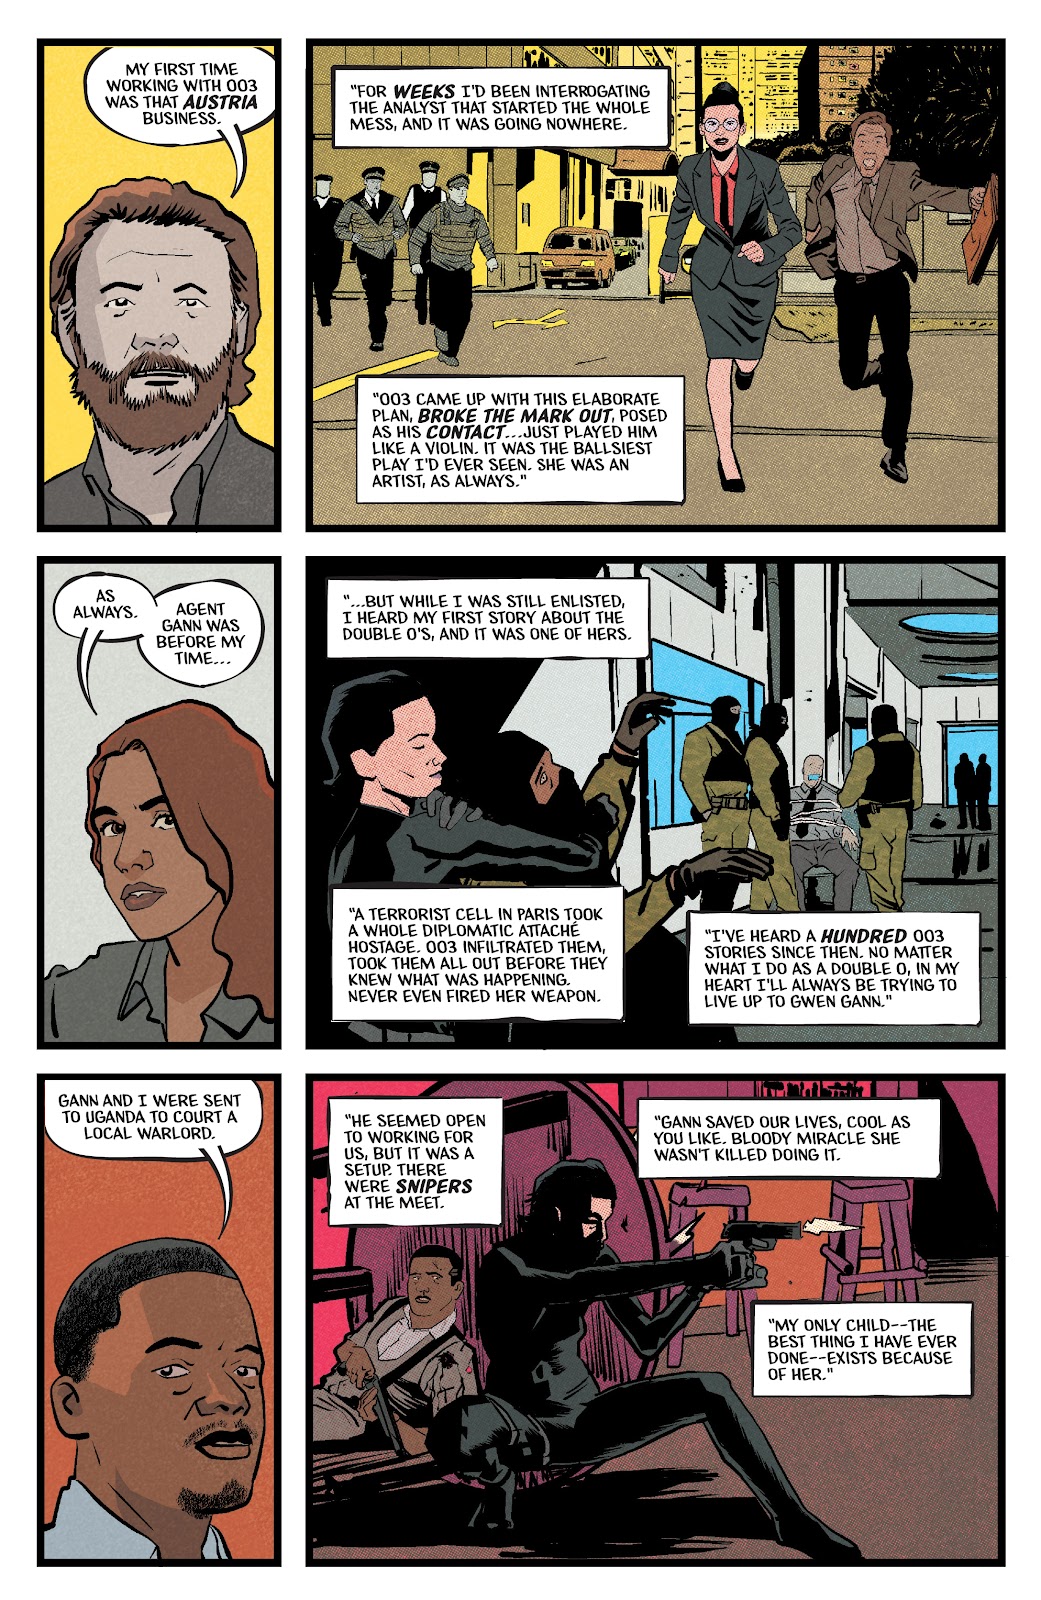 James Bond: 007 (2022) issue 2 - Page 13